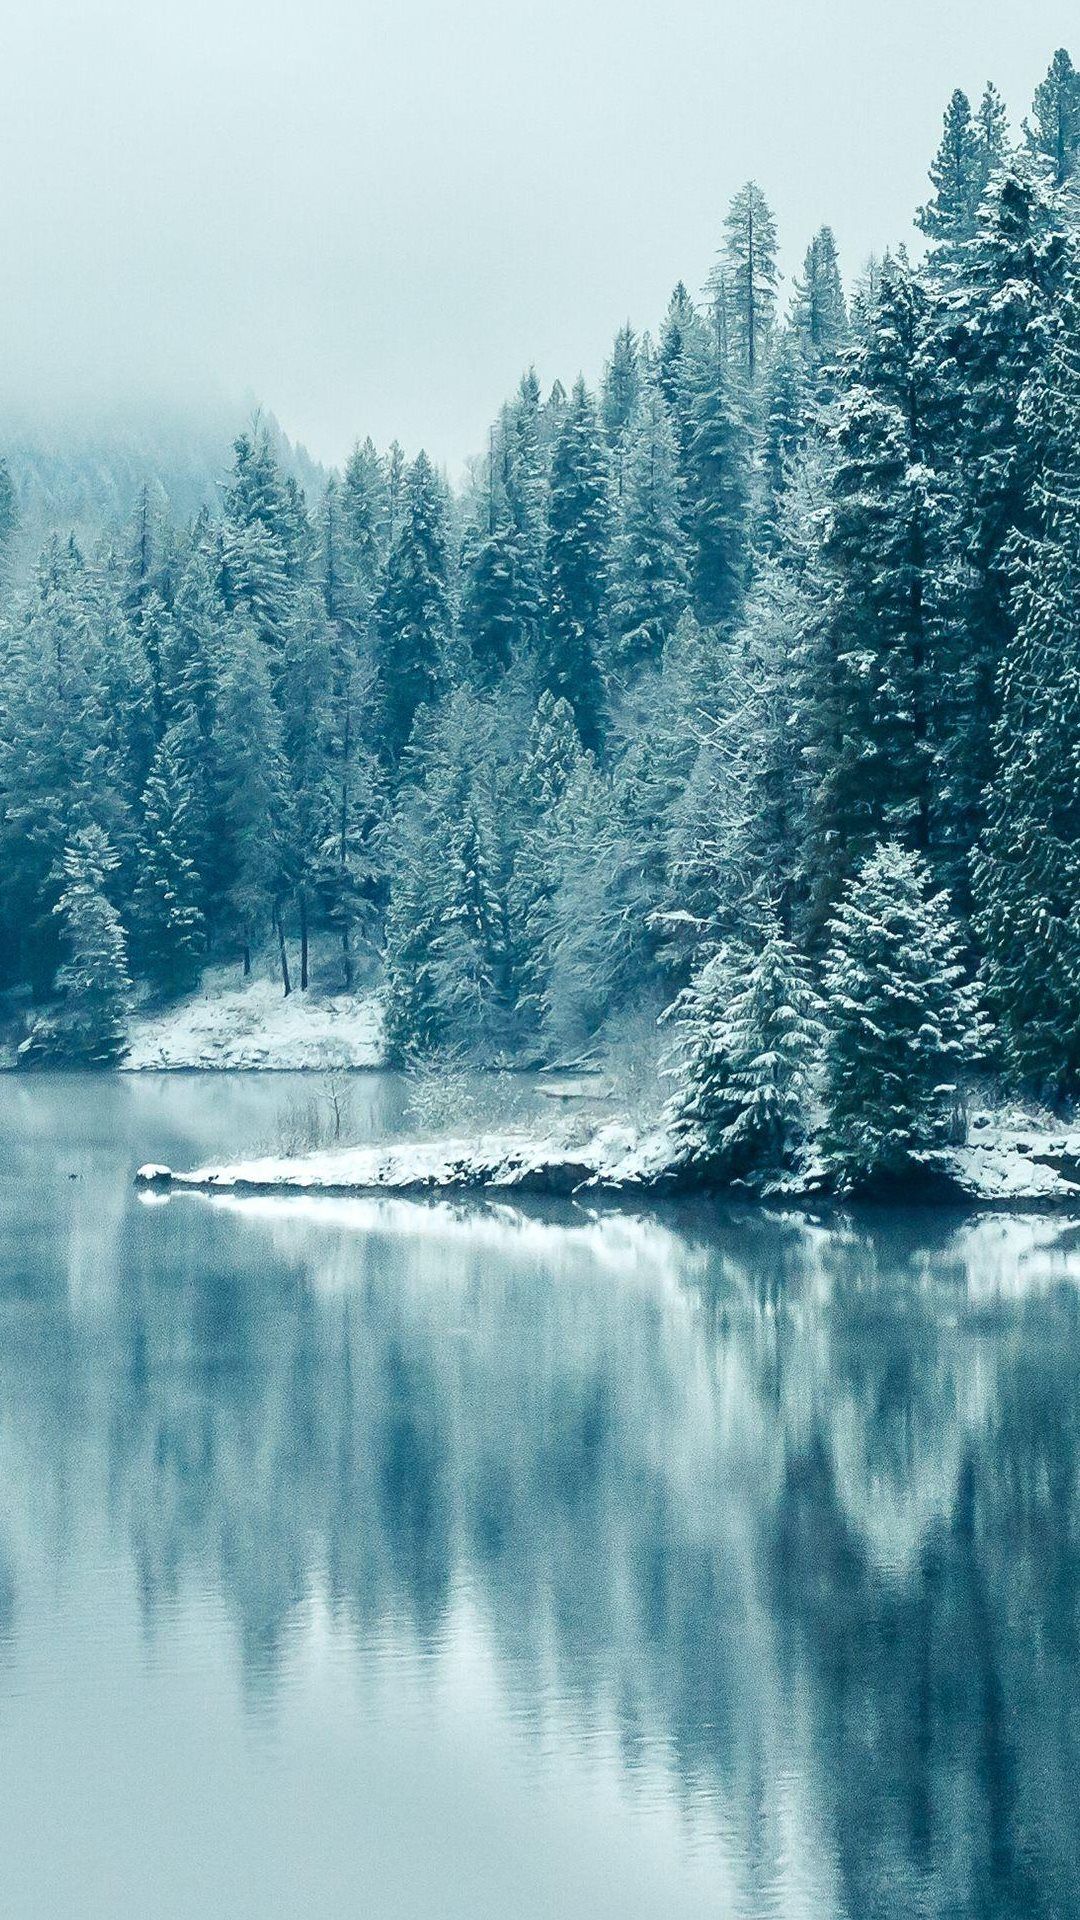 Free download Turquoise Pine Forest Lake Snow in 2020 Winter wallpaper Winter [1080x1920] for your Desktop, Mobile & Tablet. Explore Winter 2020 HD Wallpaper. Winter Wallpaper HD, HD Wallpaper Winter, HD Winter Wallpaper